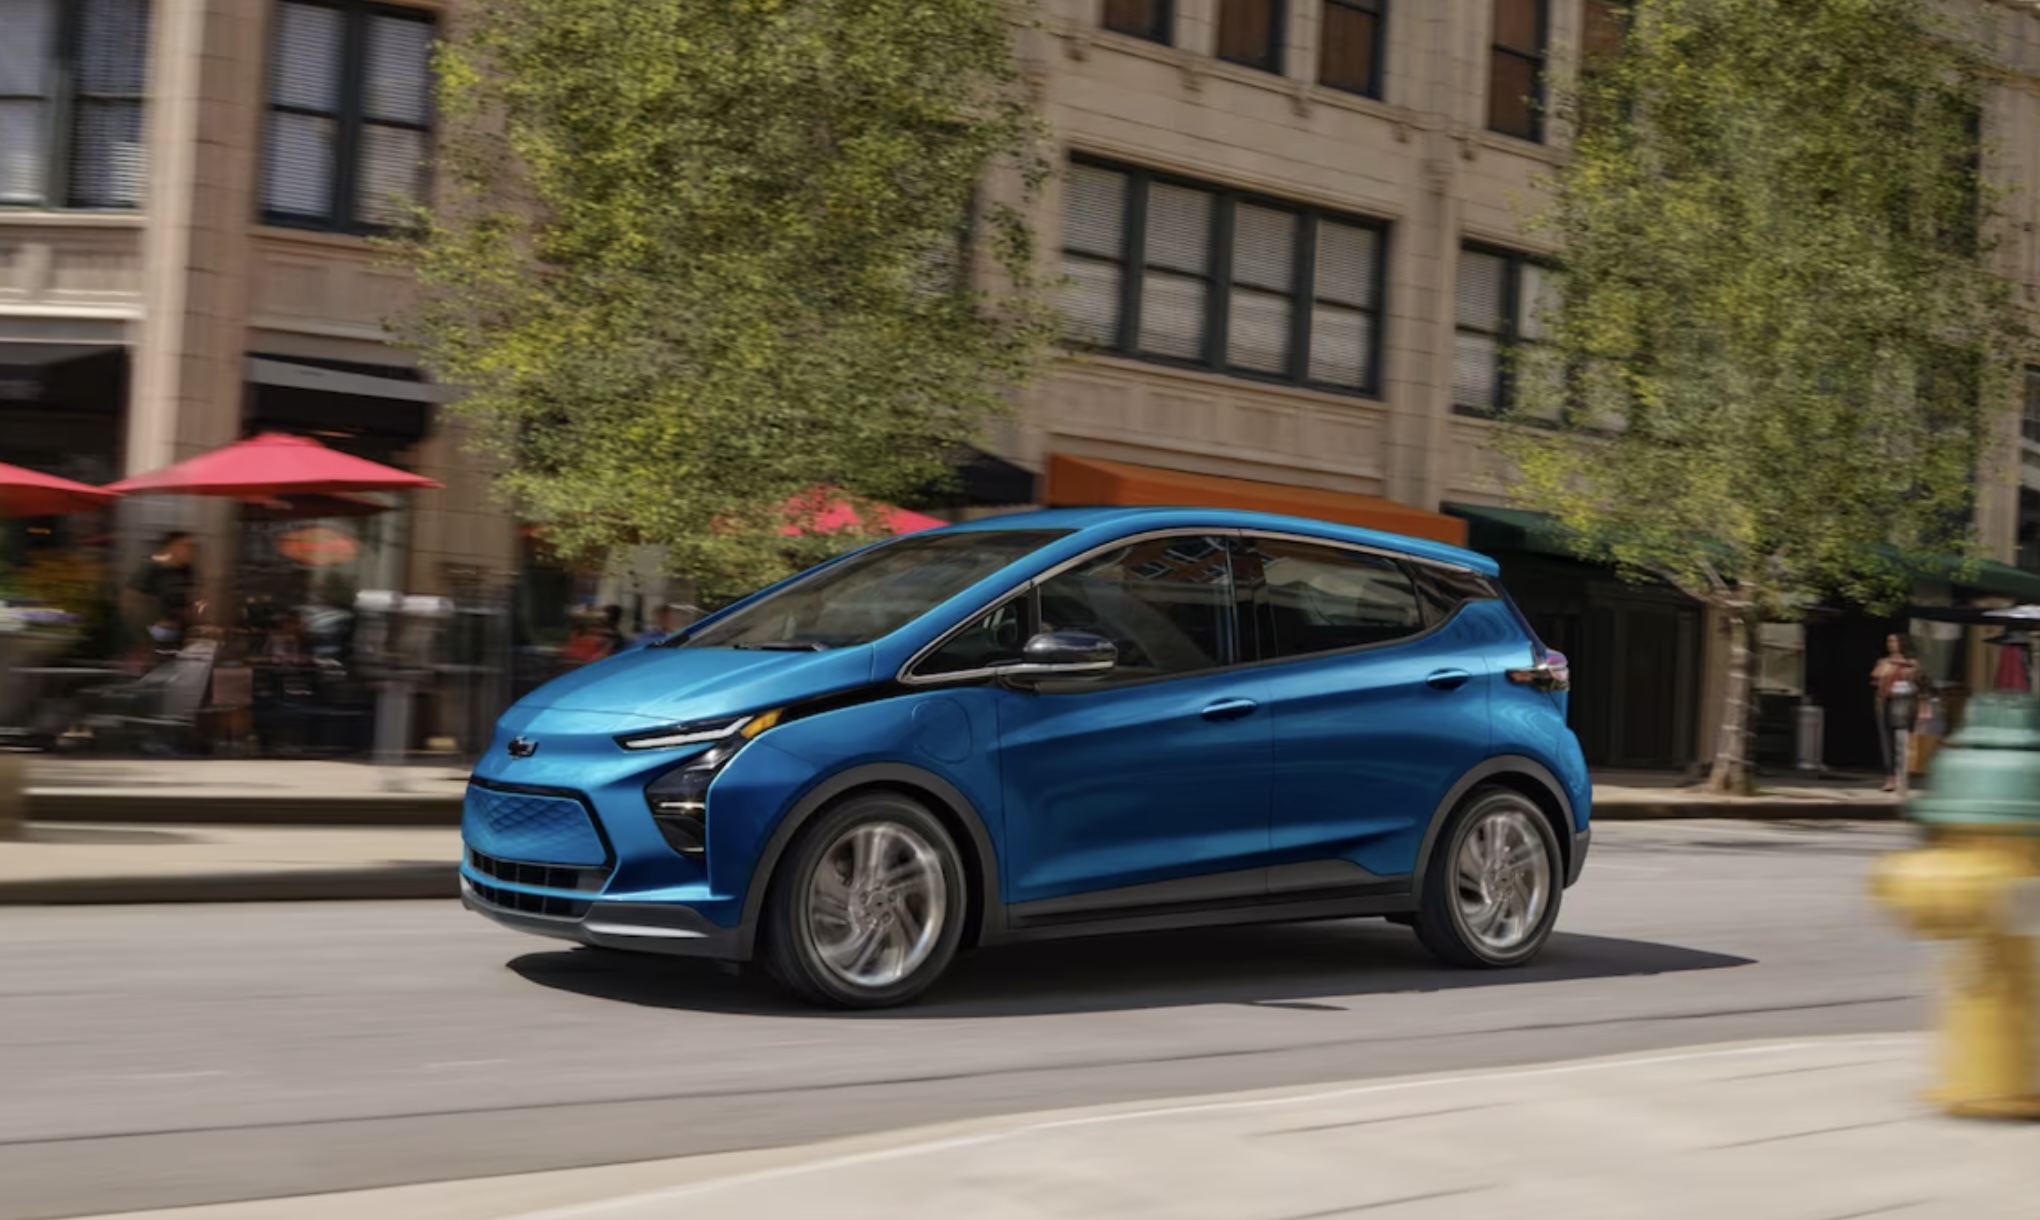 GM invests $390M in KS for next-gen Chevy Bolt EV production Auto Recent